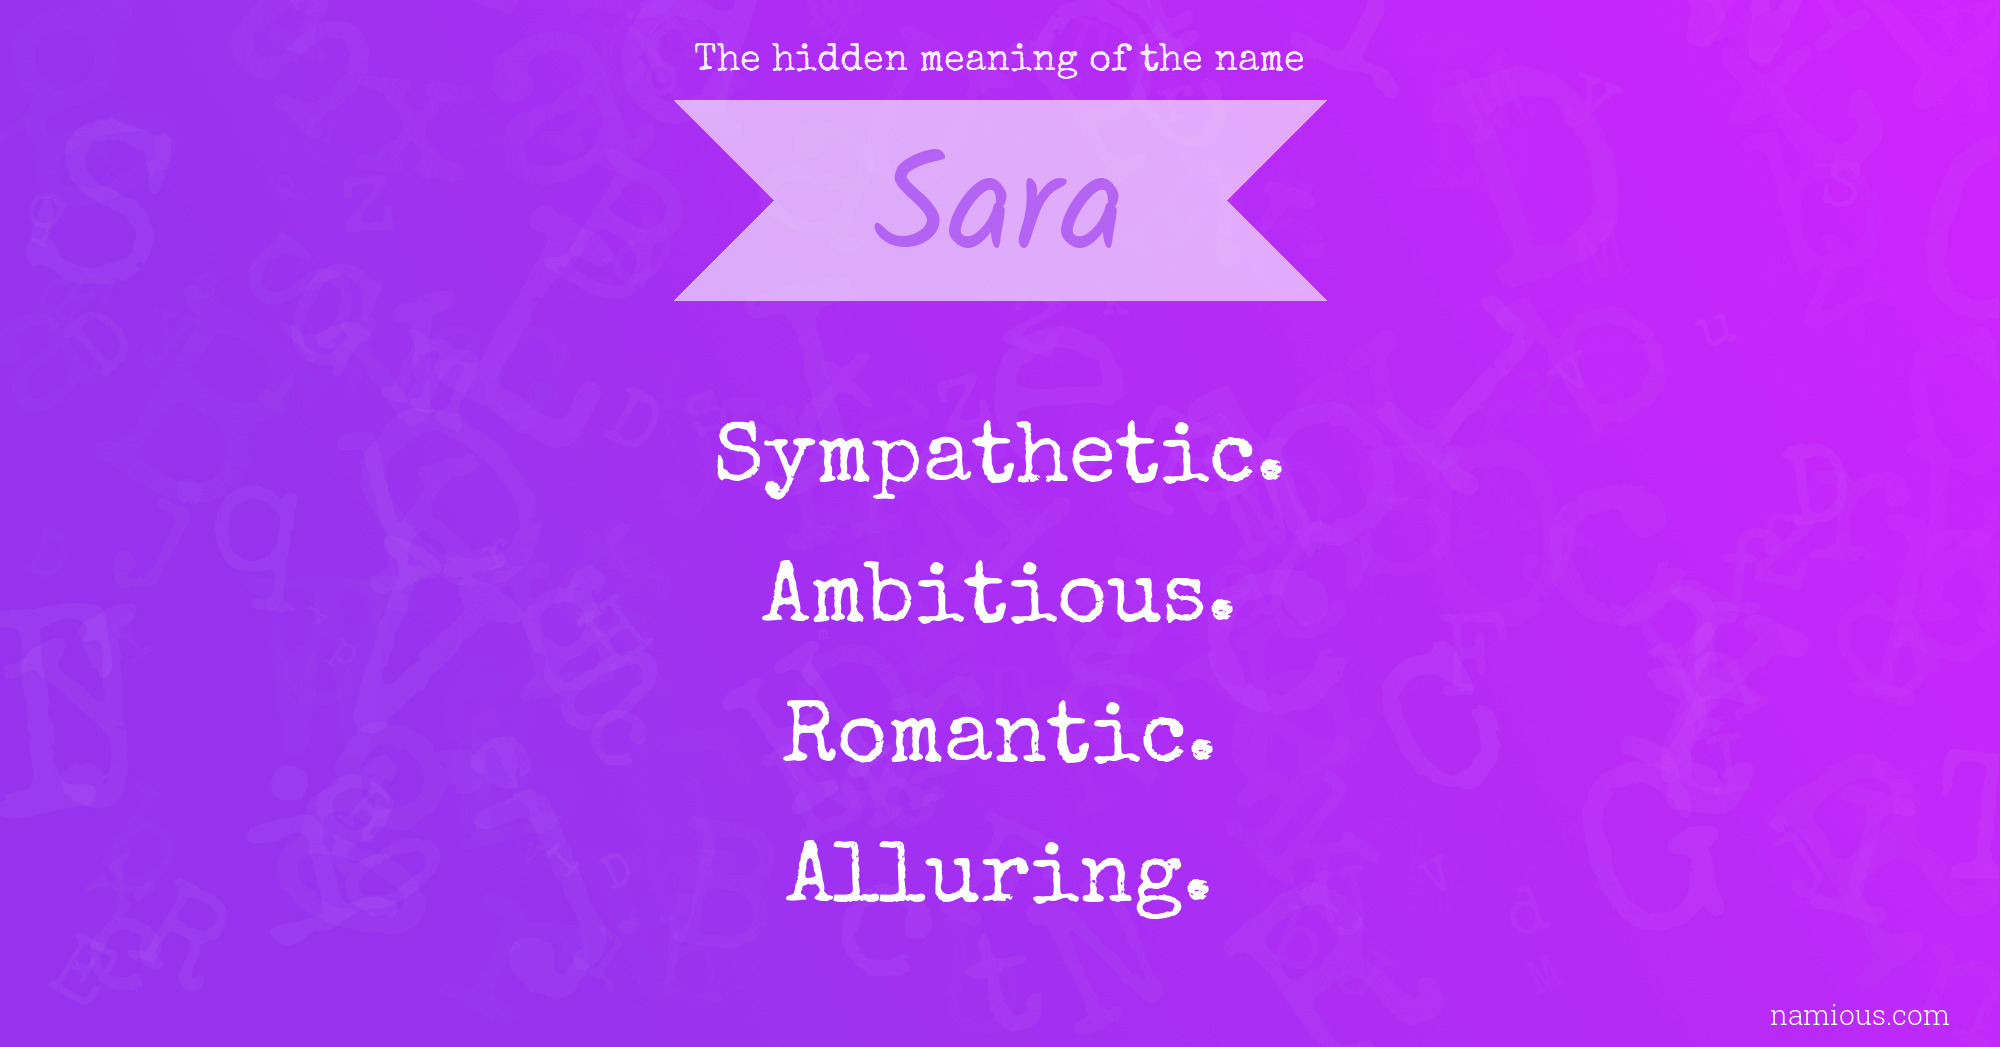 The hidden meaning of the name Sara